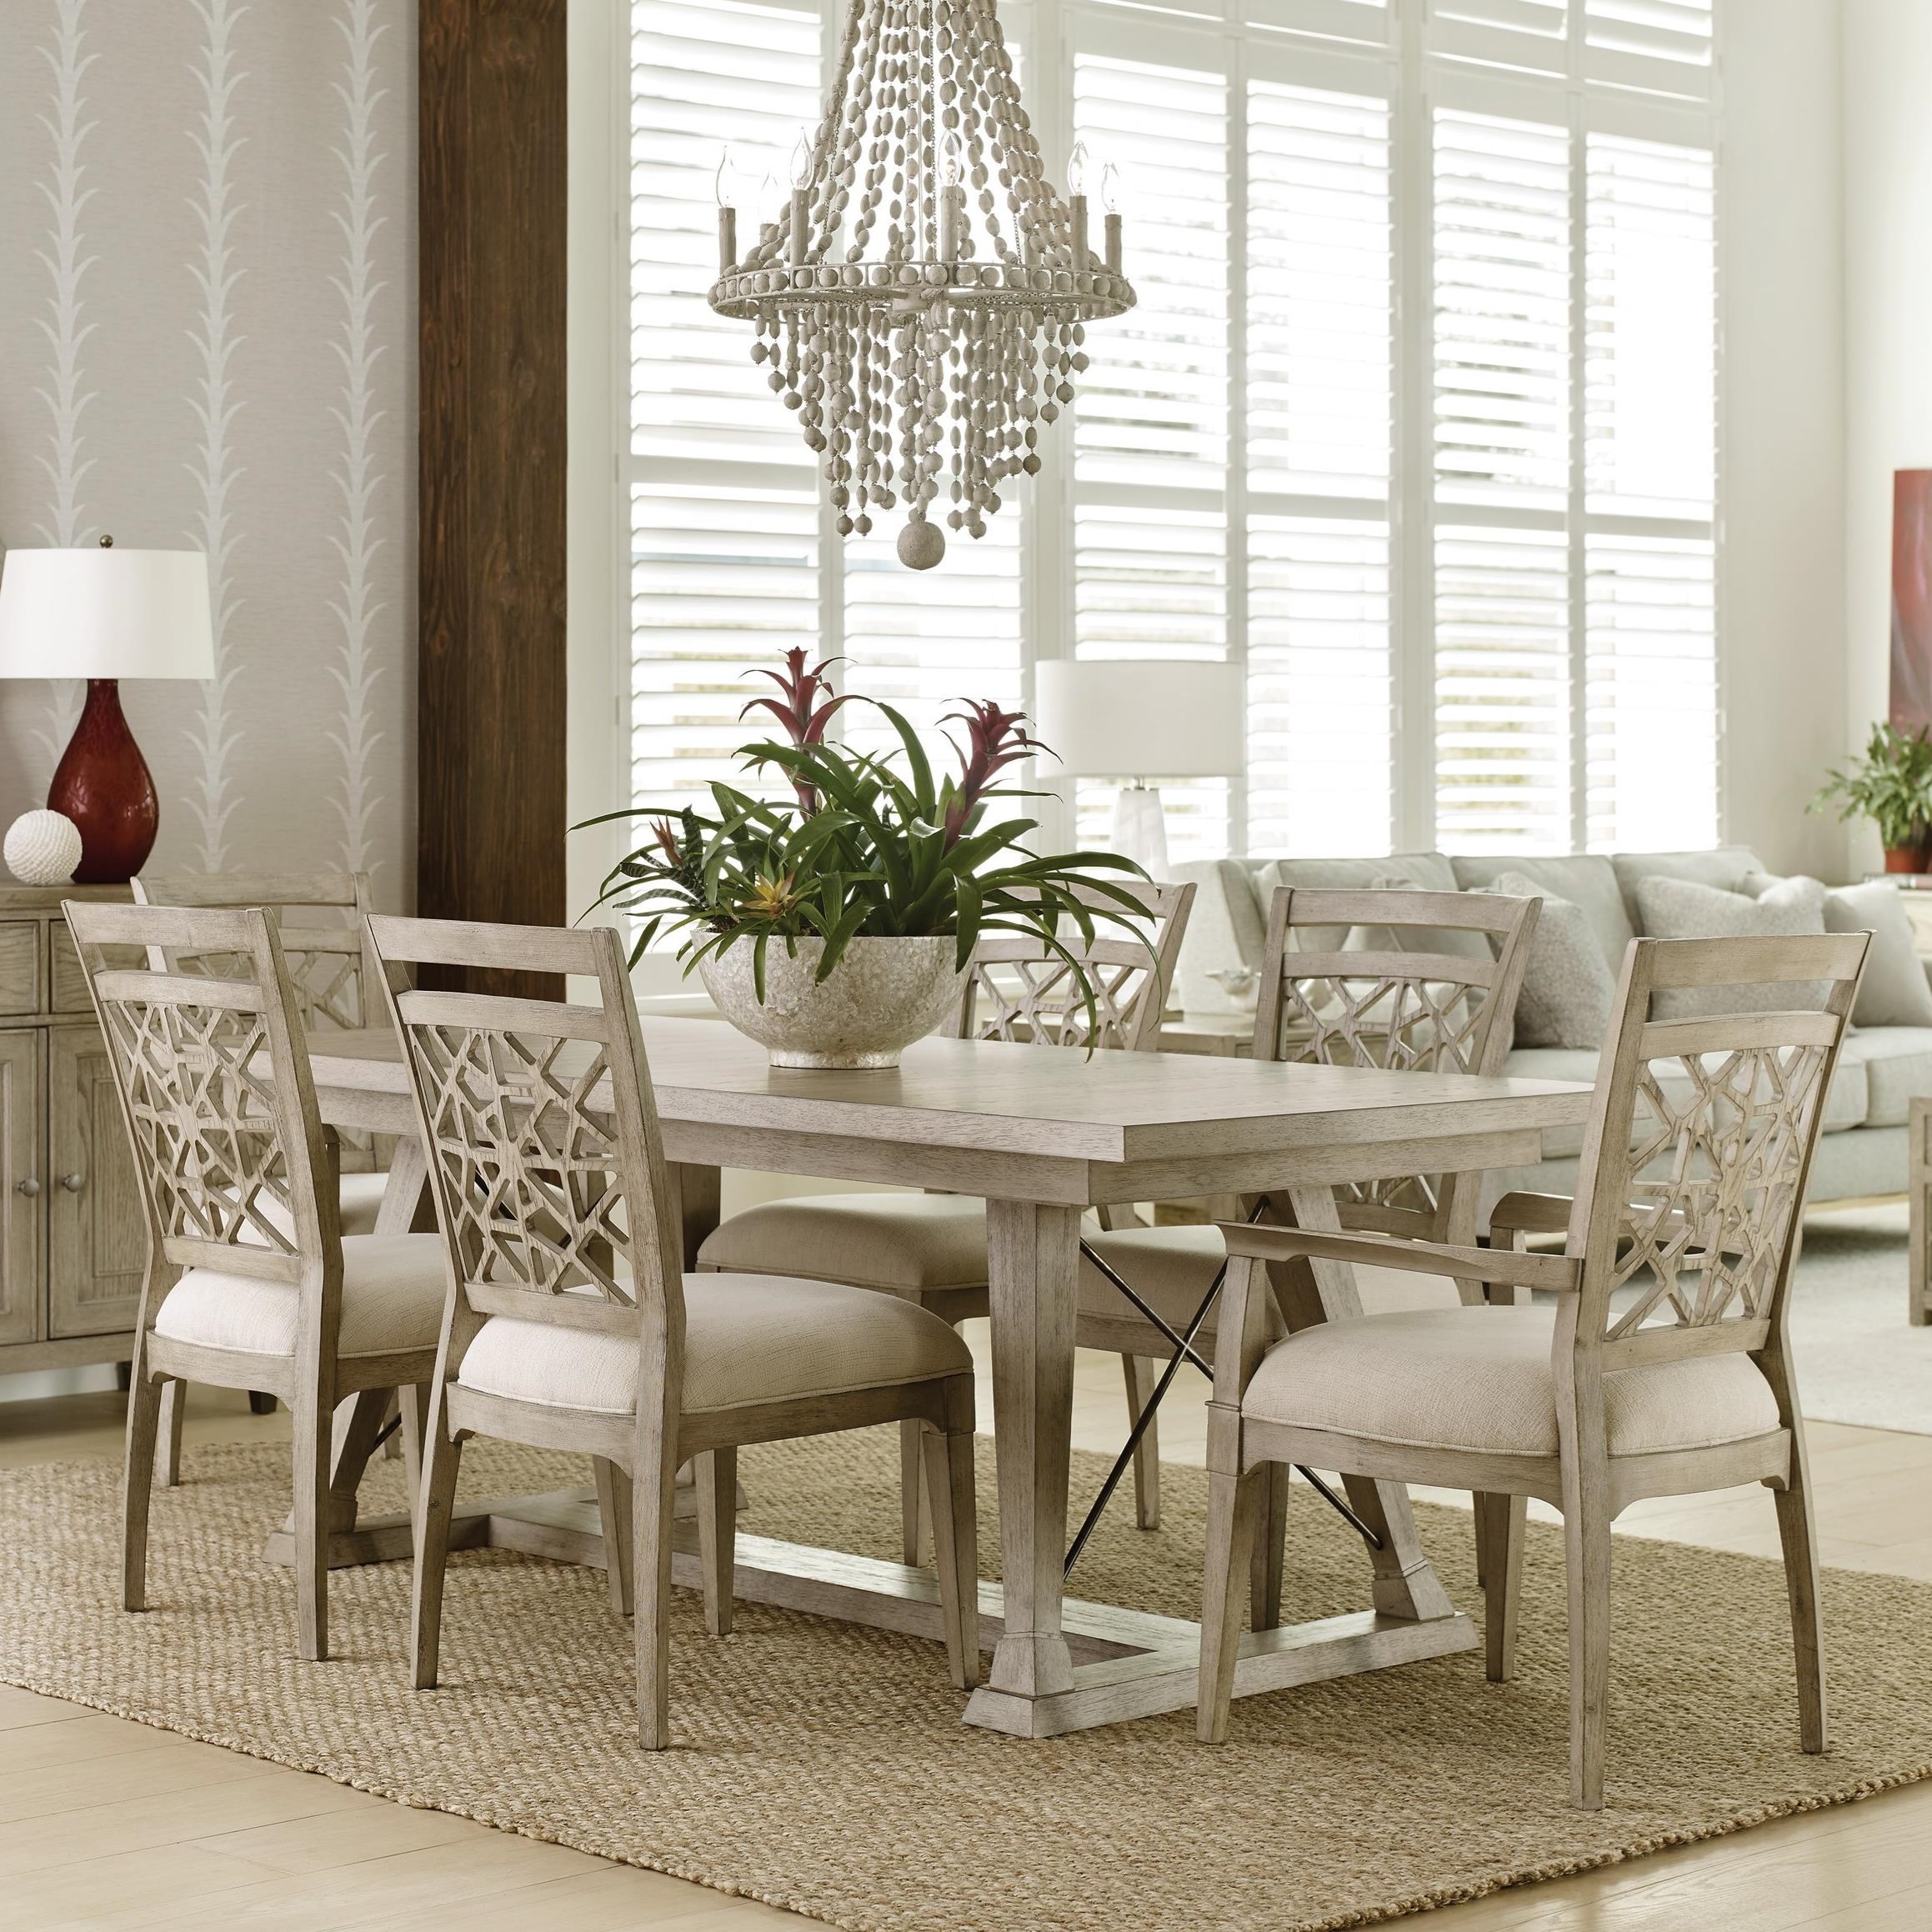 Relaxed Vintage 7 Piece Dining Set with Removable Leaves